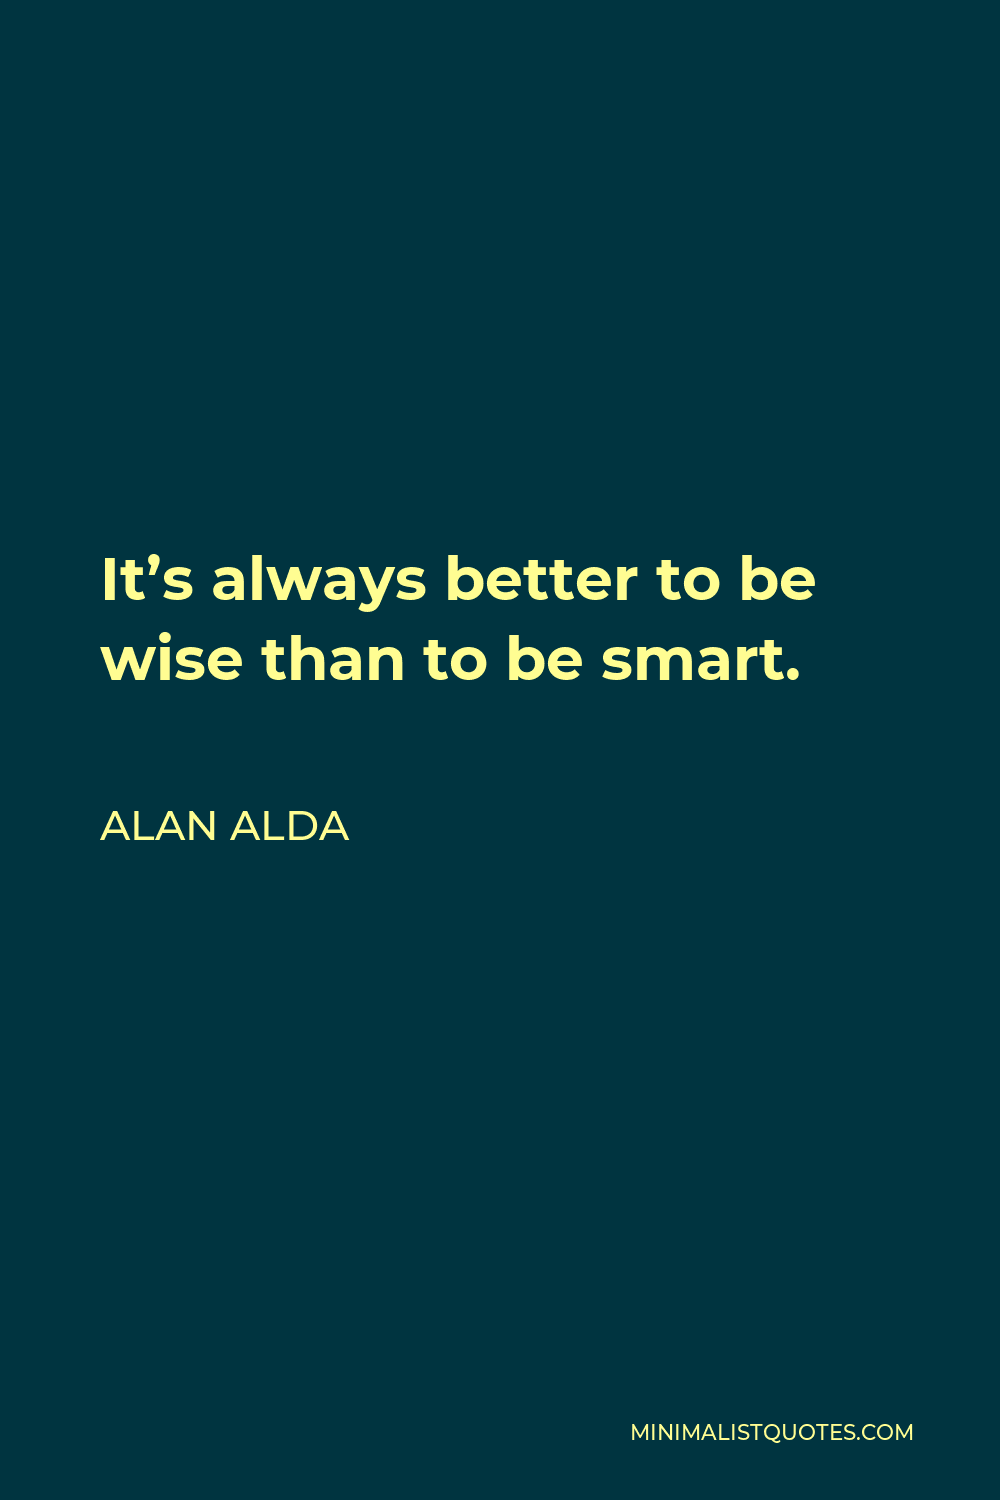 Alan Alda Quote - It’s always better to be wise than to be smart.